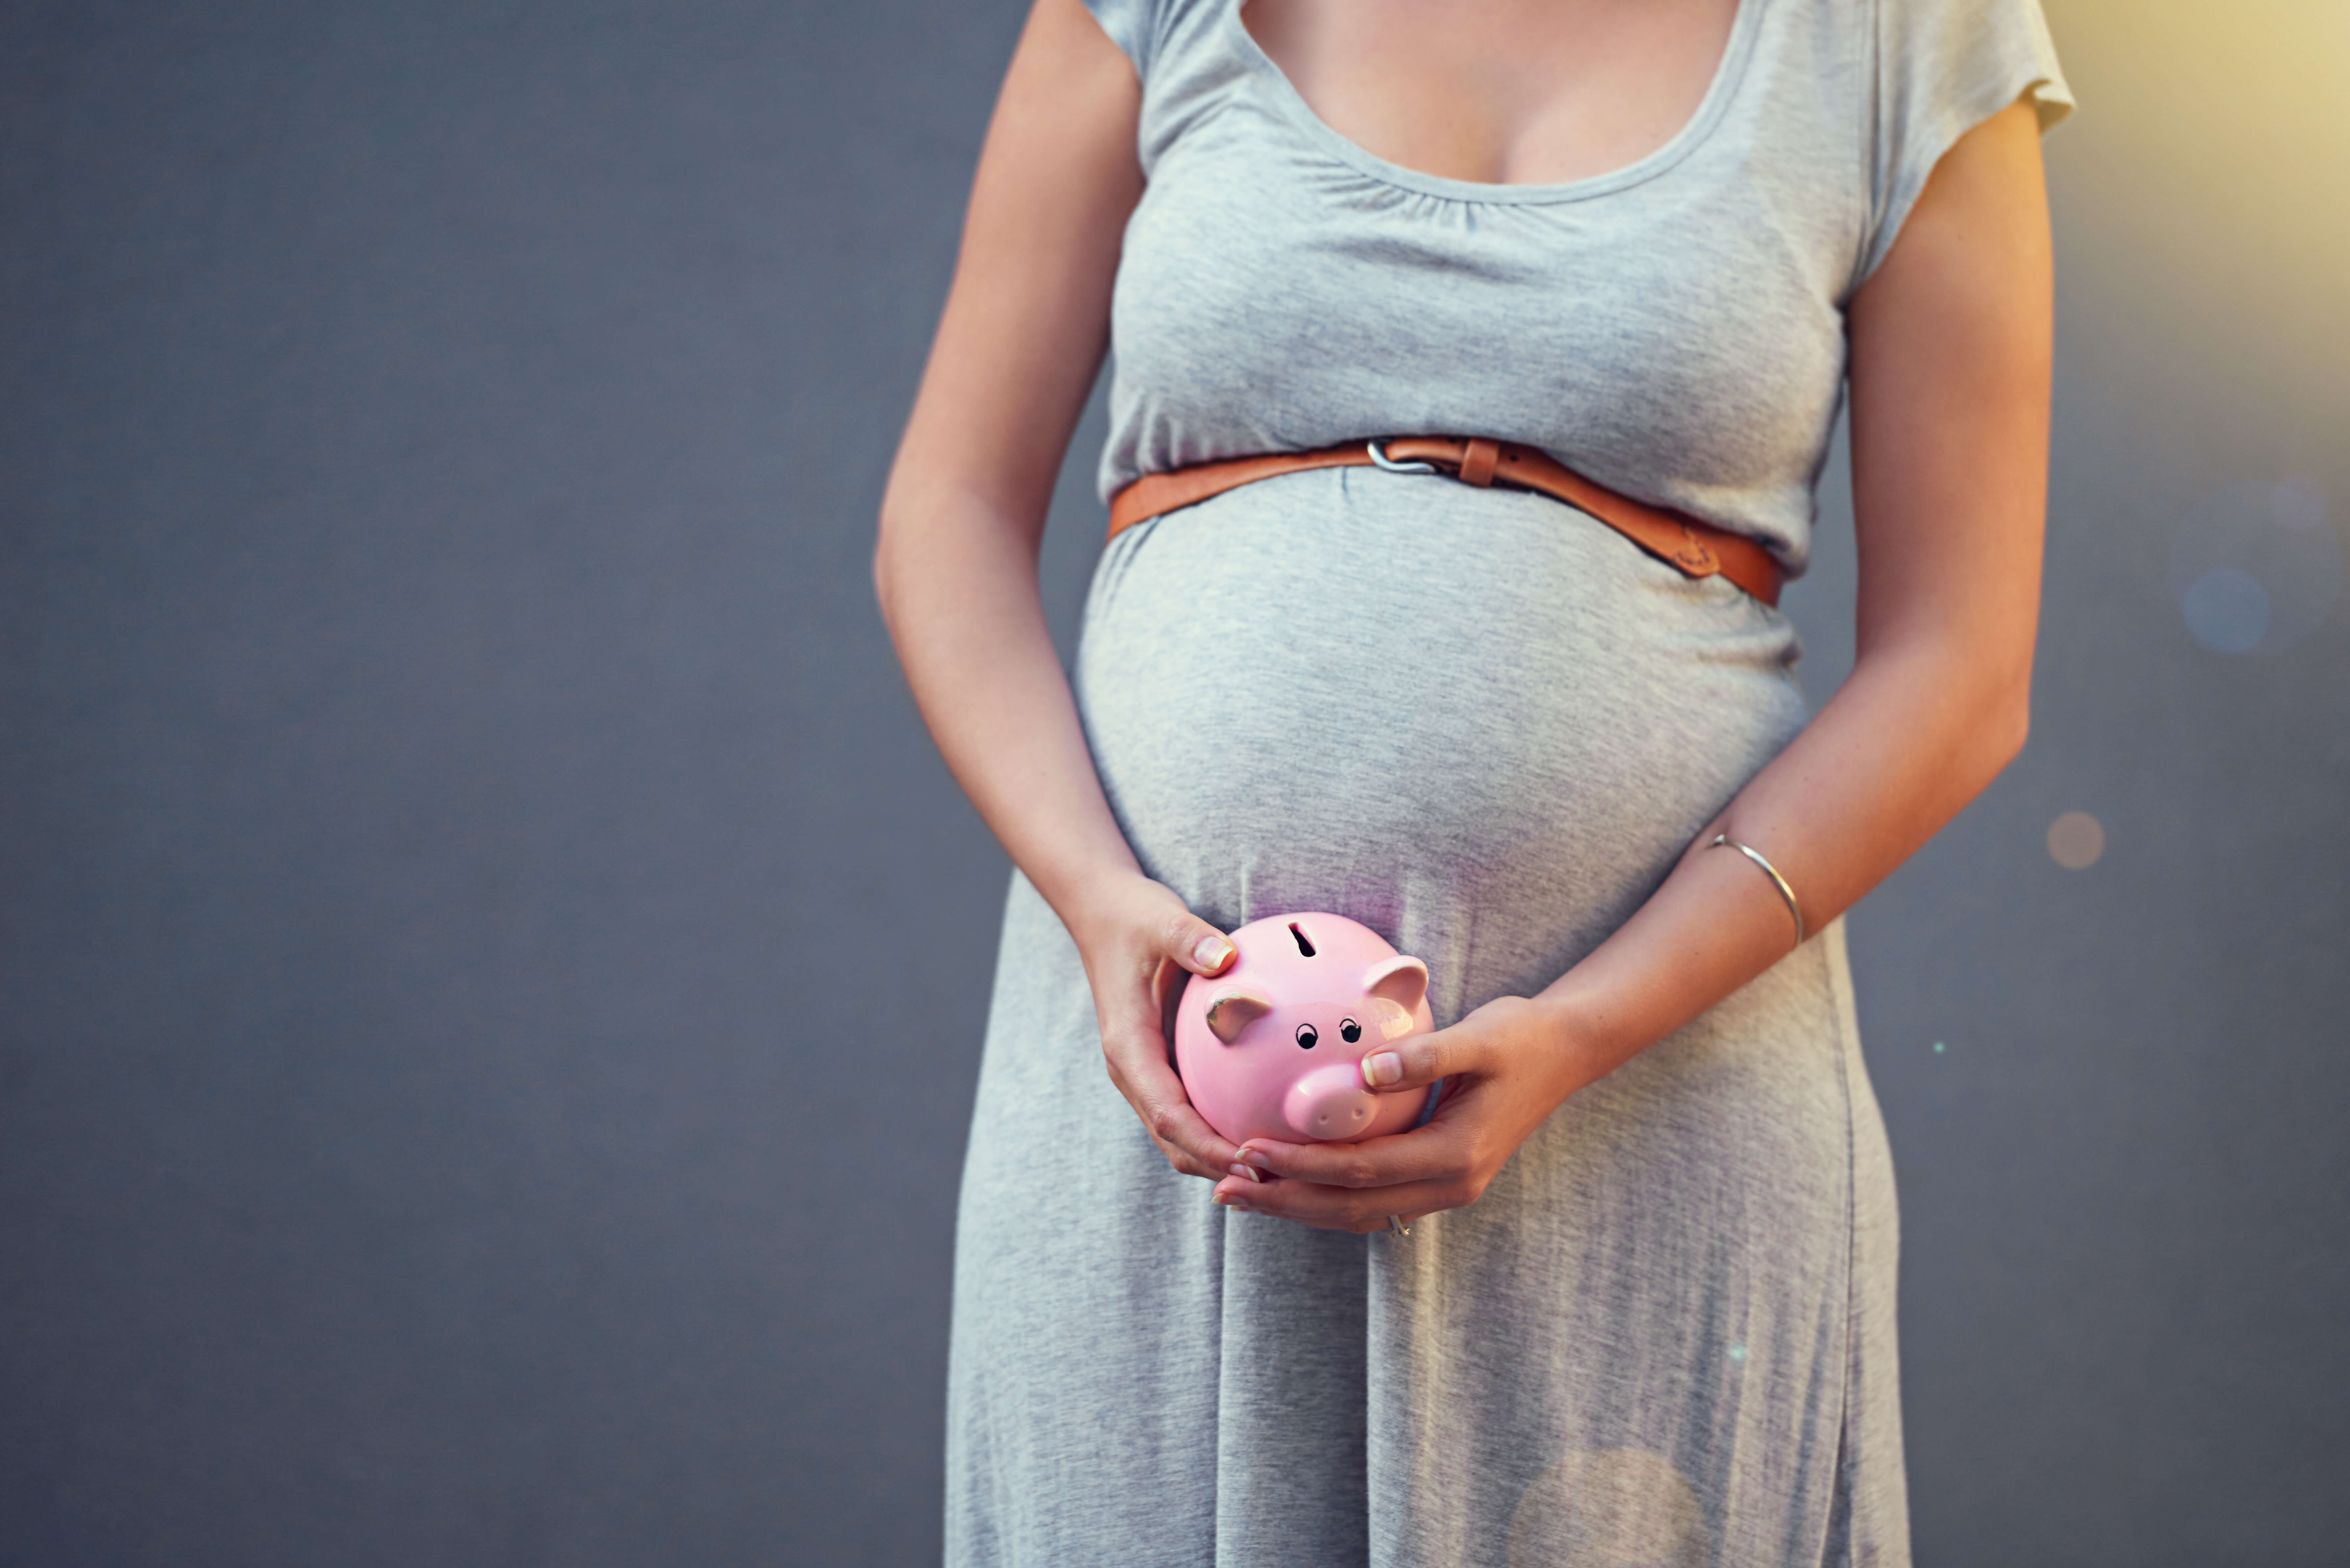 Financial Assistance for Unplanned Pregnancy